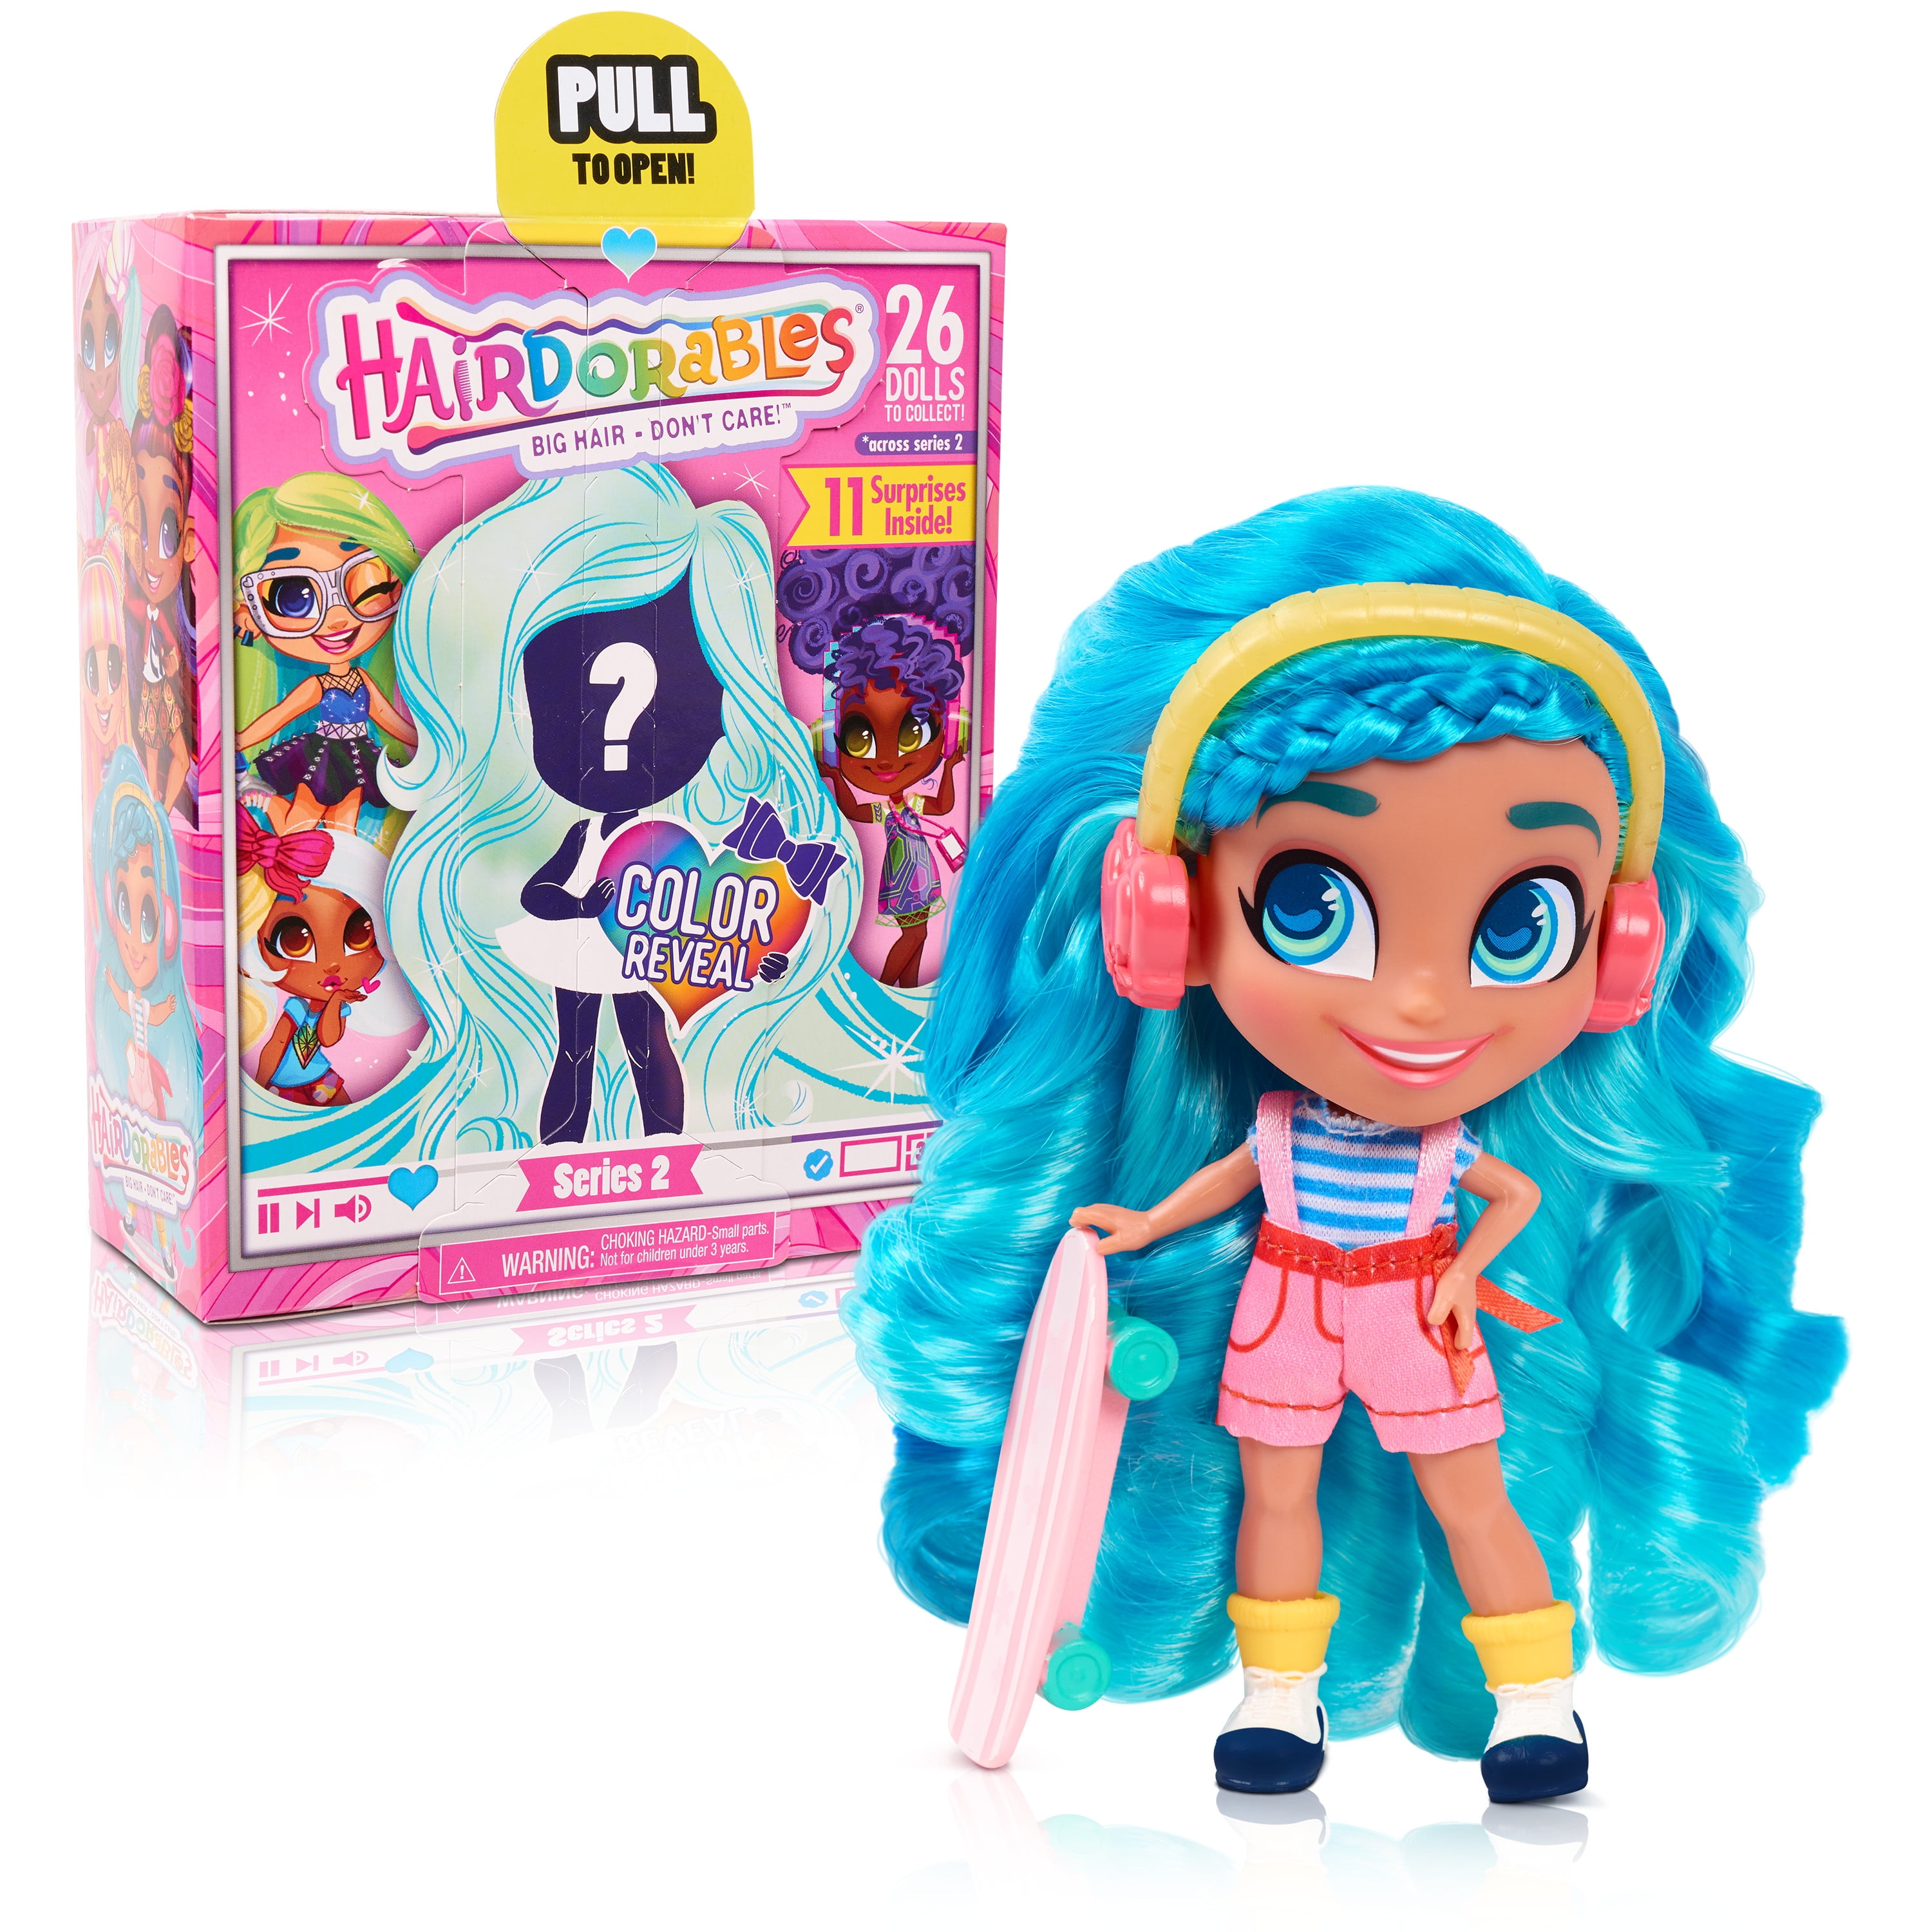 Hairdorables Series 3 Aveugles Pack Collectible Dolls-JPL23725